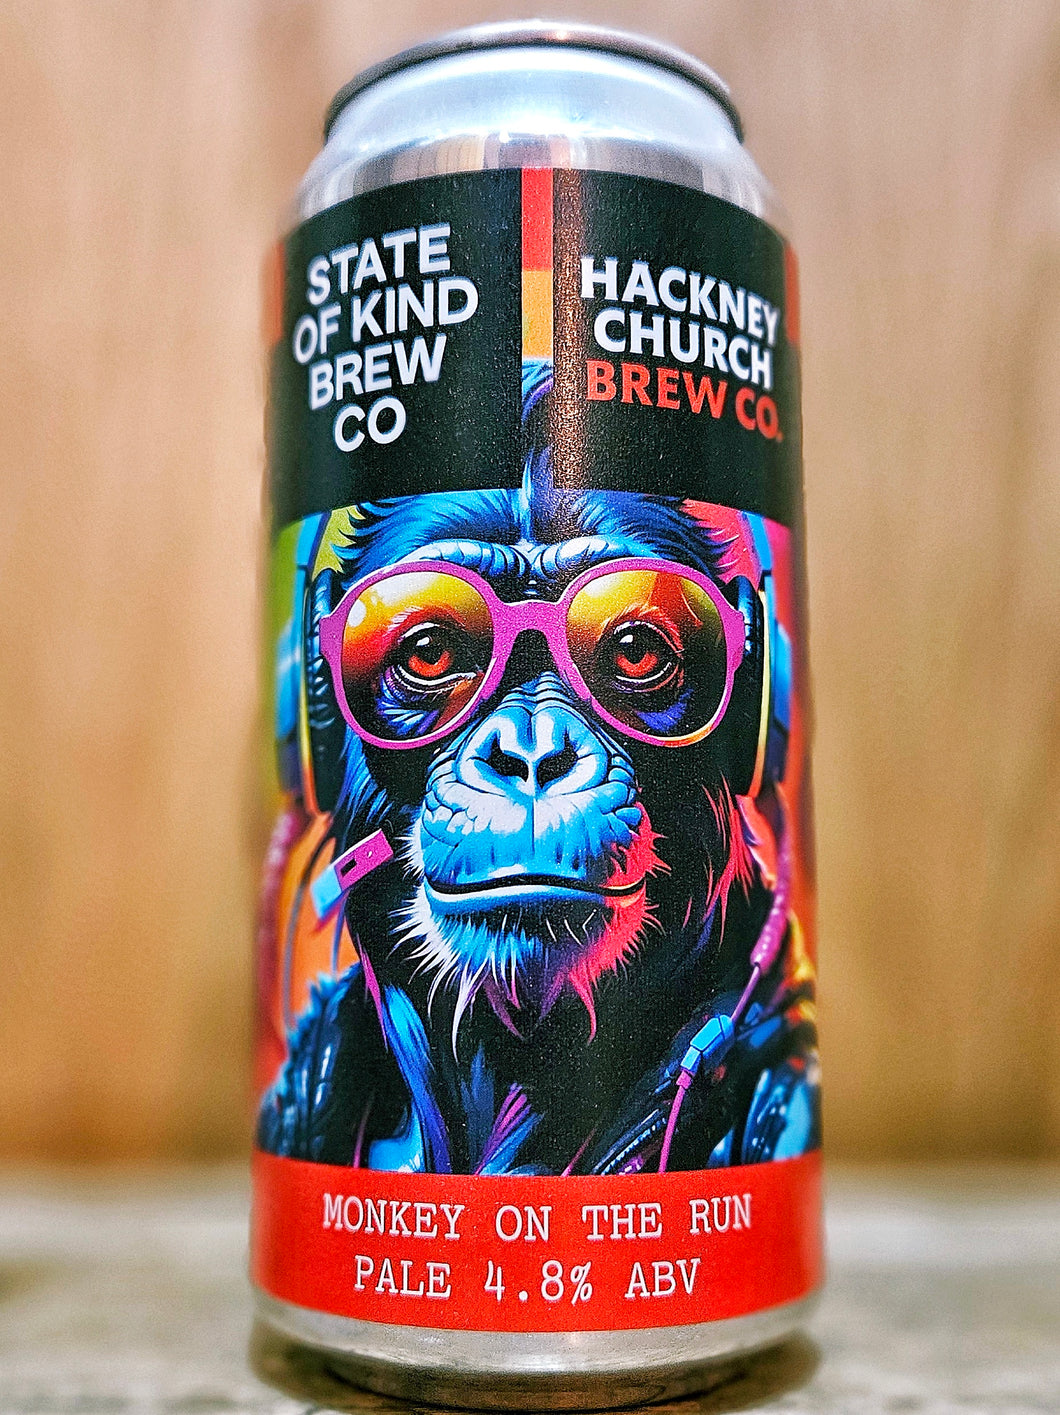 State Of Kind Brew Co v Hackney Church Brew Co - Monkey On The Run